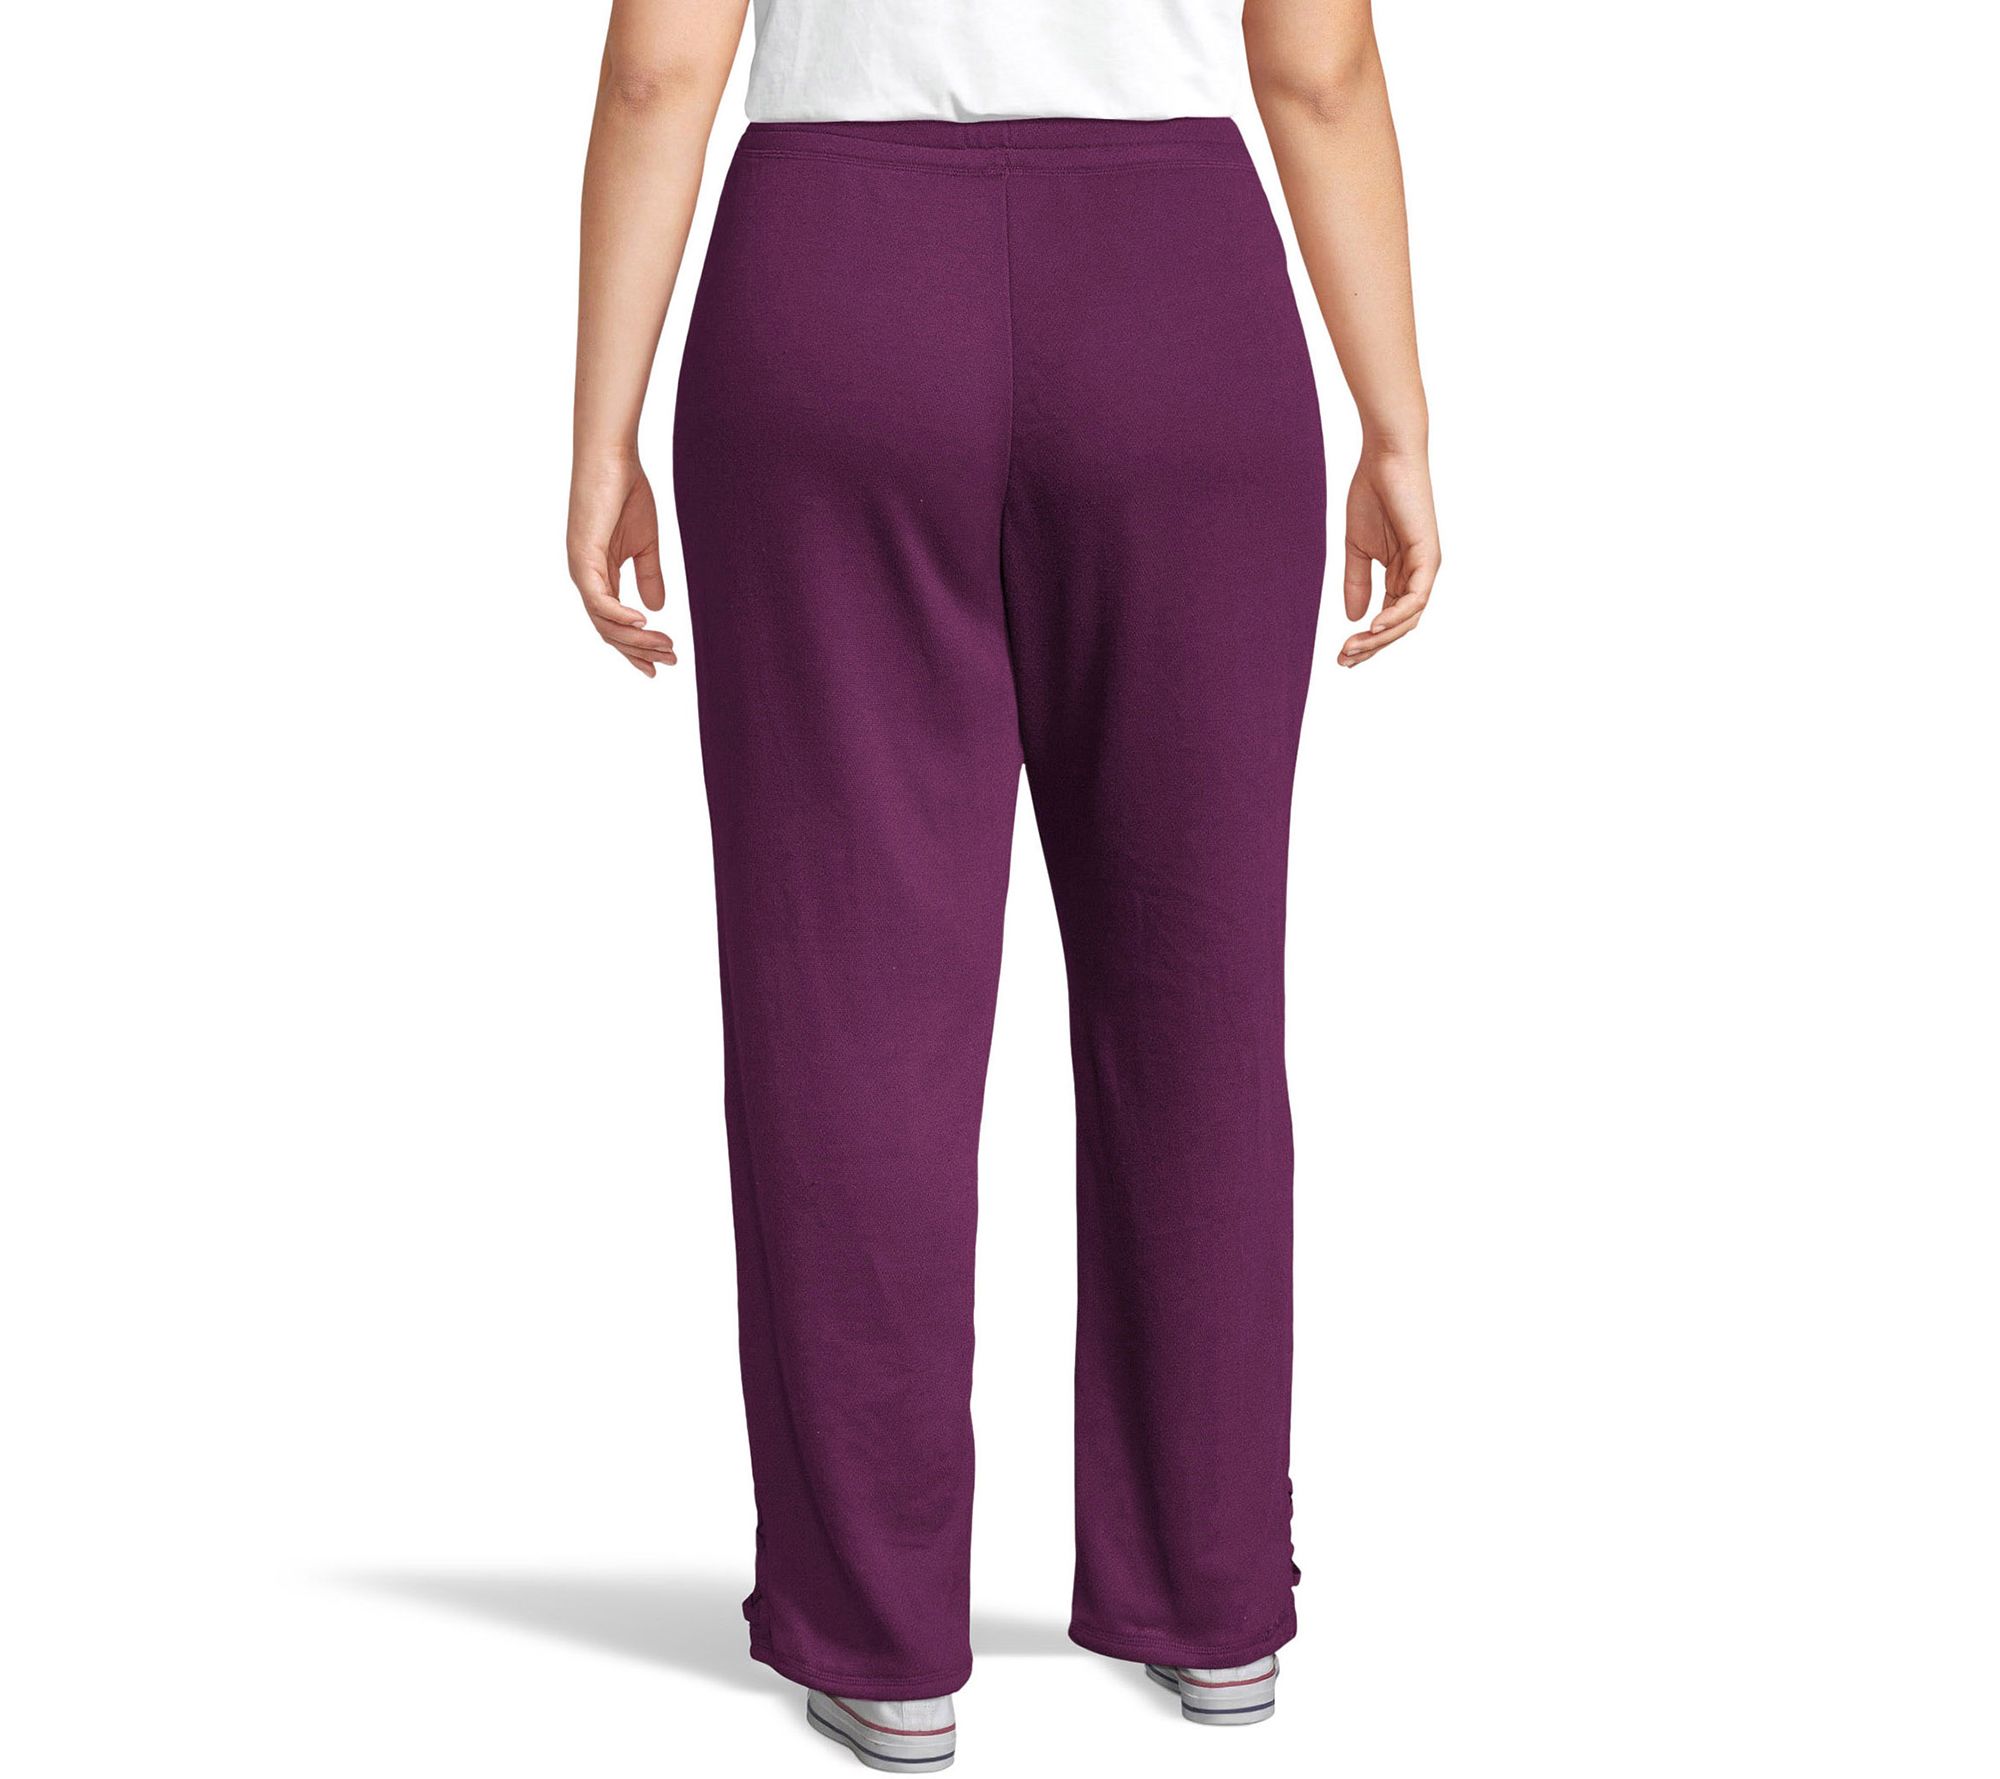 Just My Size French Terry Jogger Pants with Lace Details - QVC.com